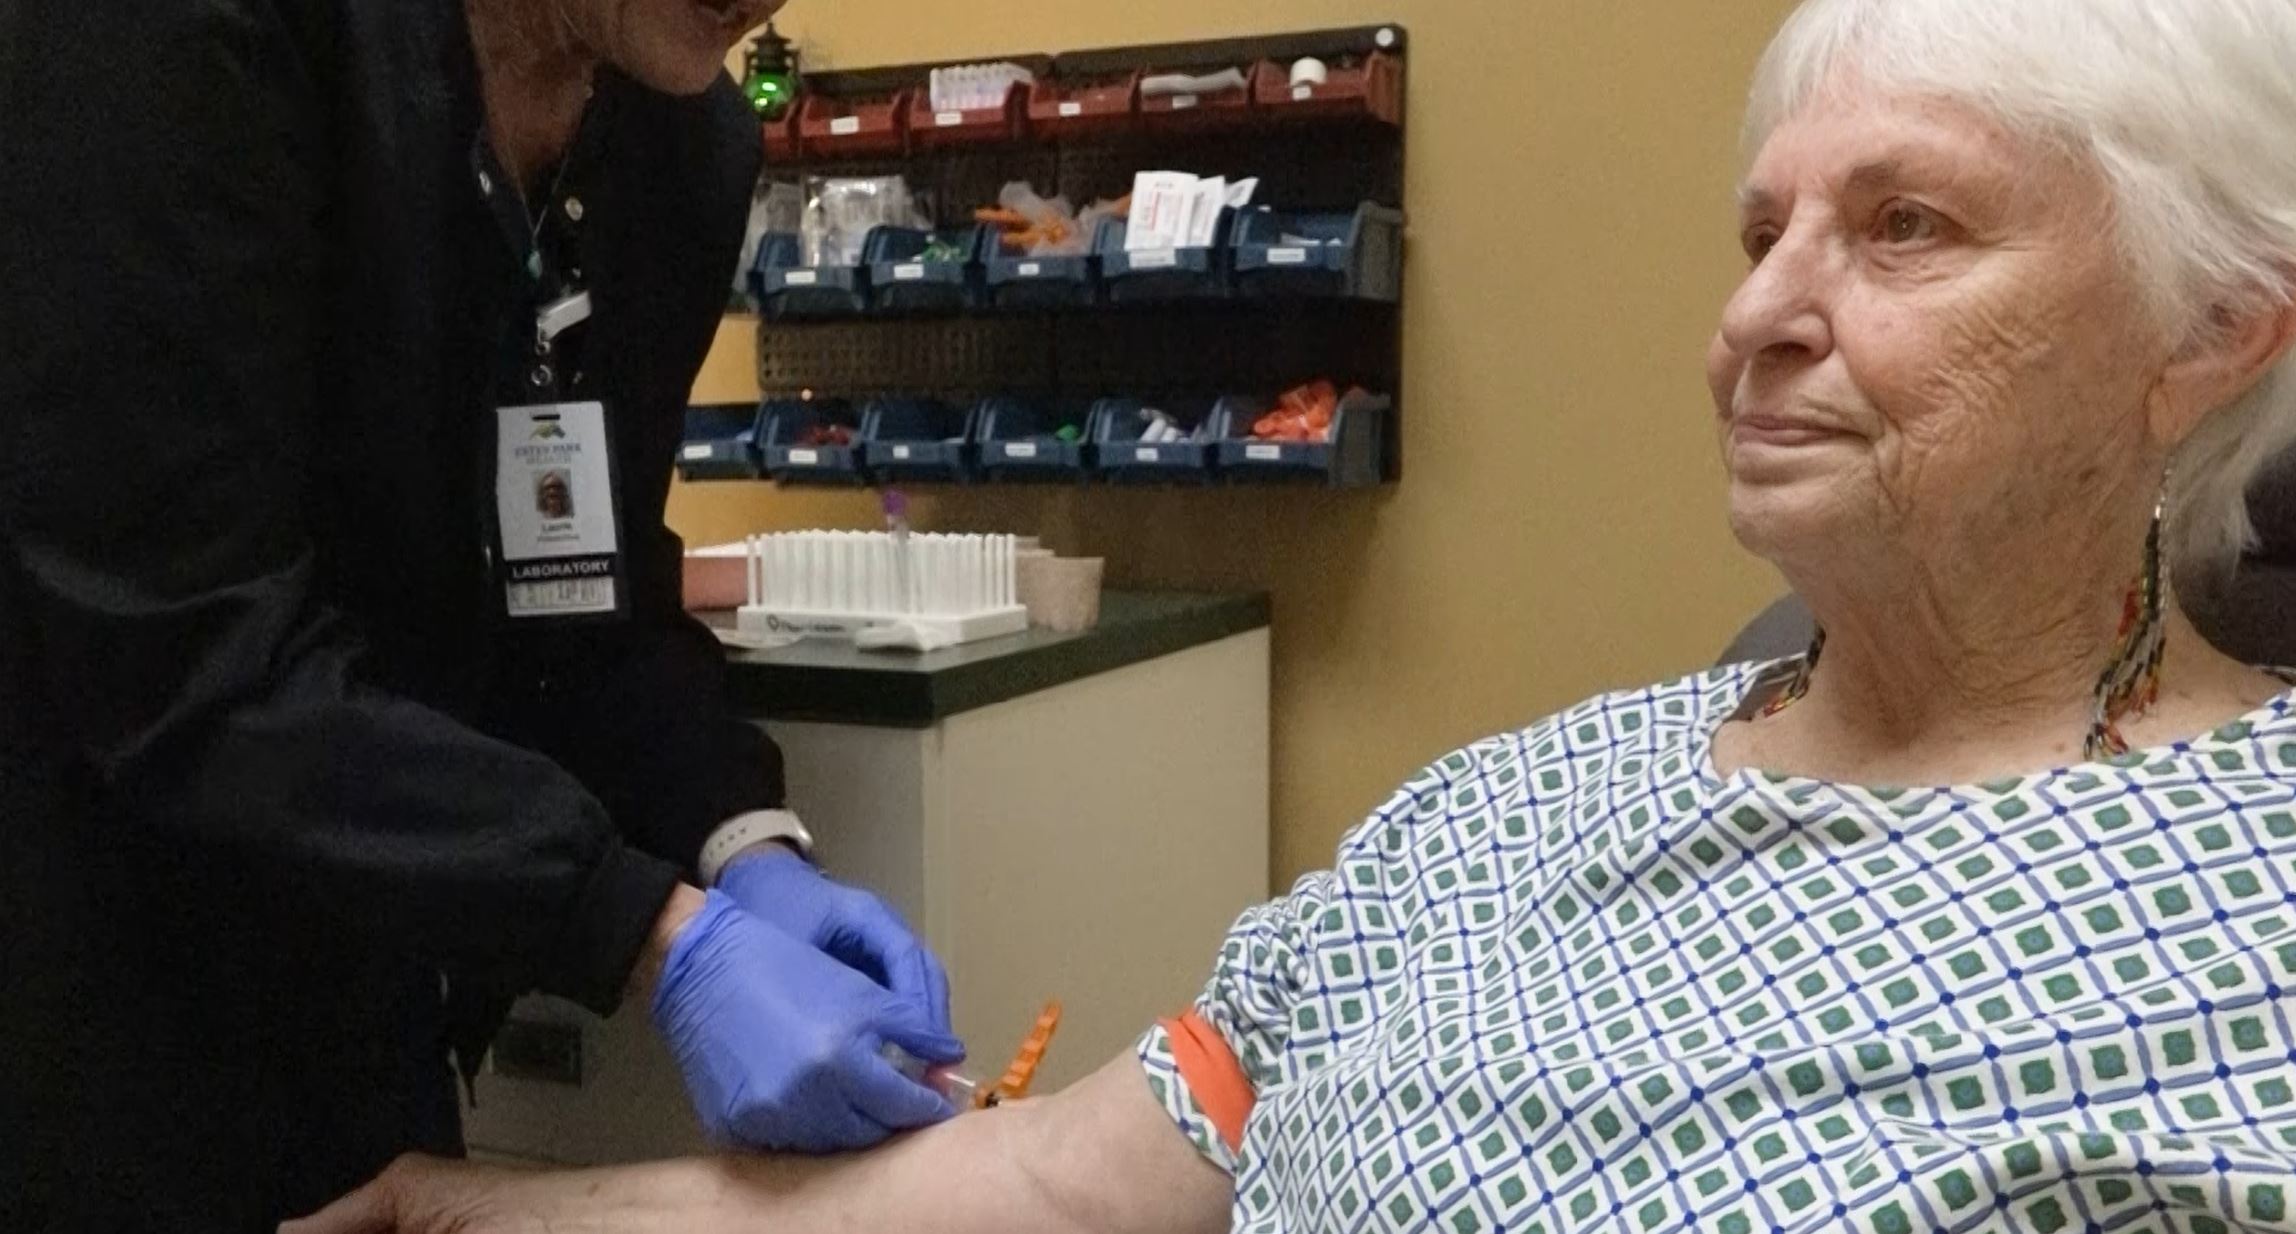 A healthcare professional prepares to draw blood from an elderly woman seated in a medical clinic. Equipment and supplies are visible in the background.